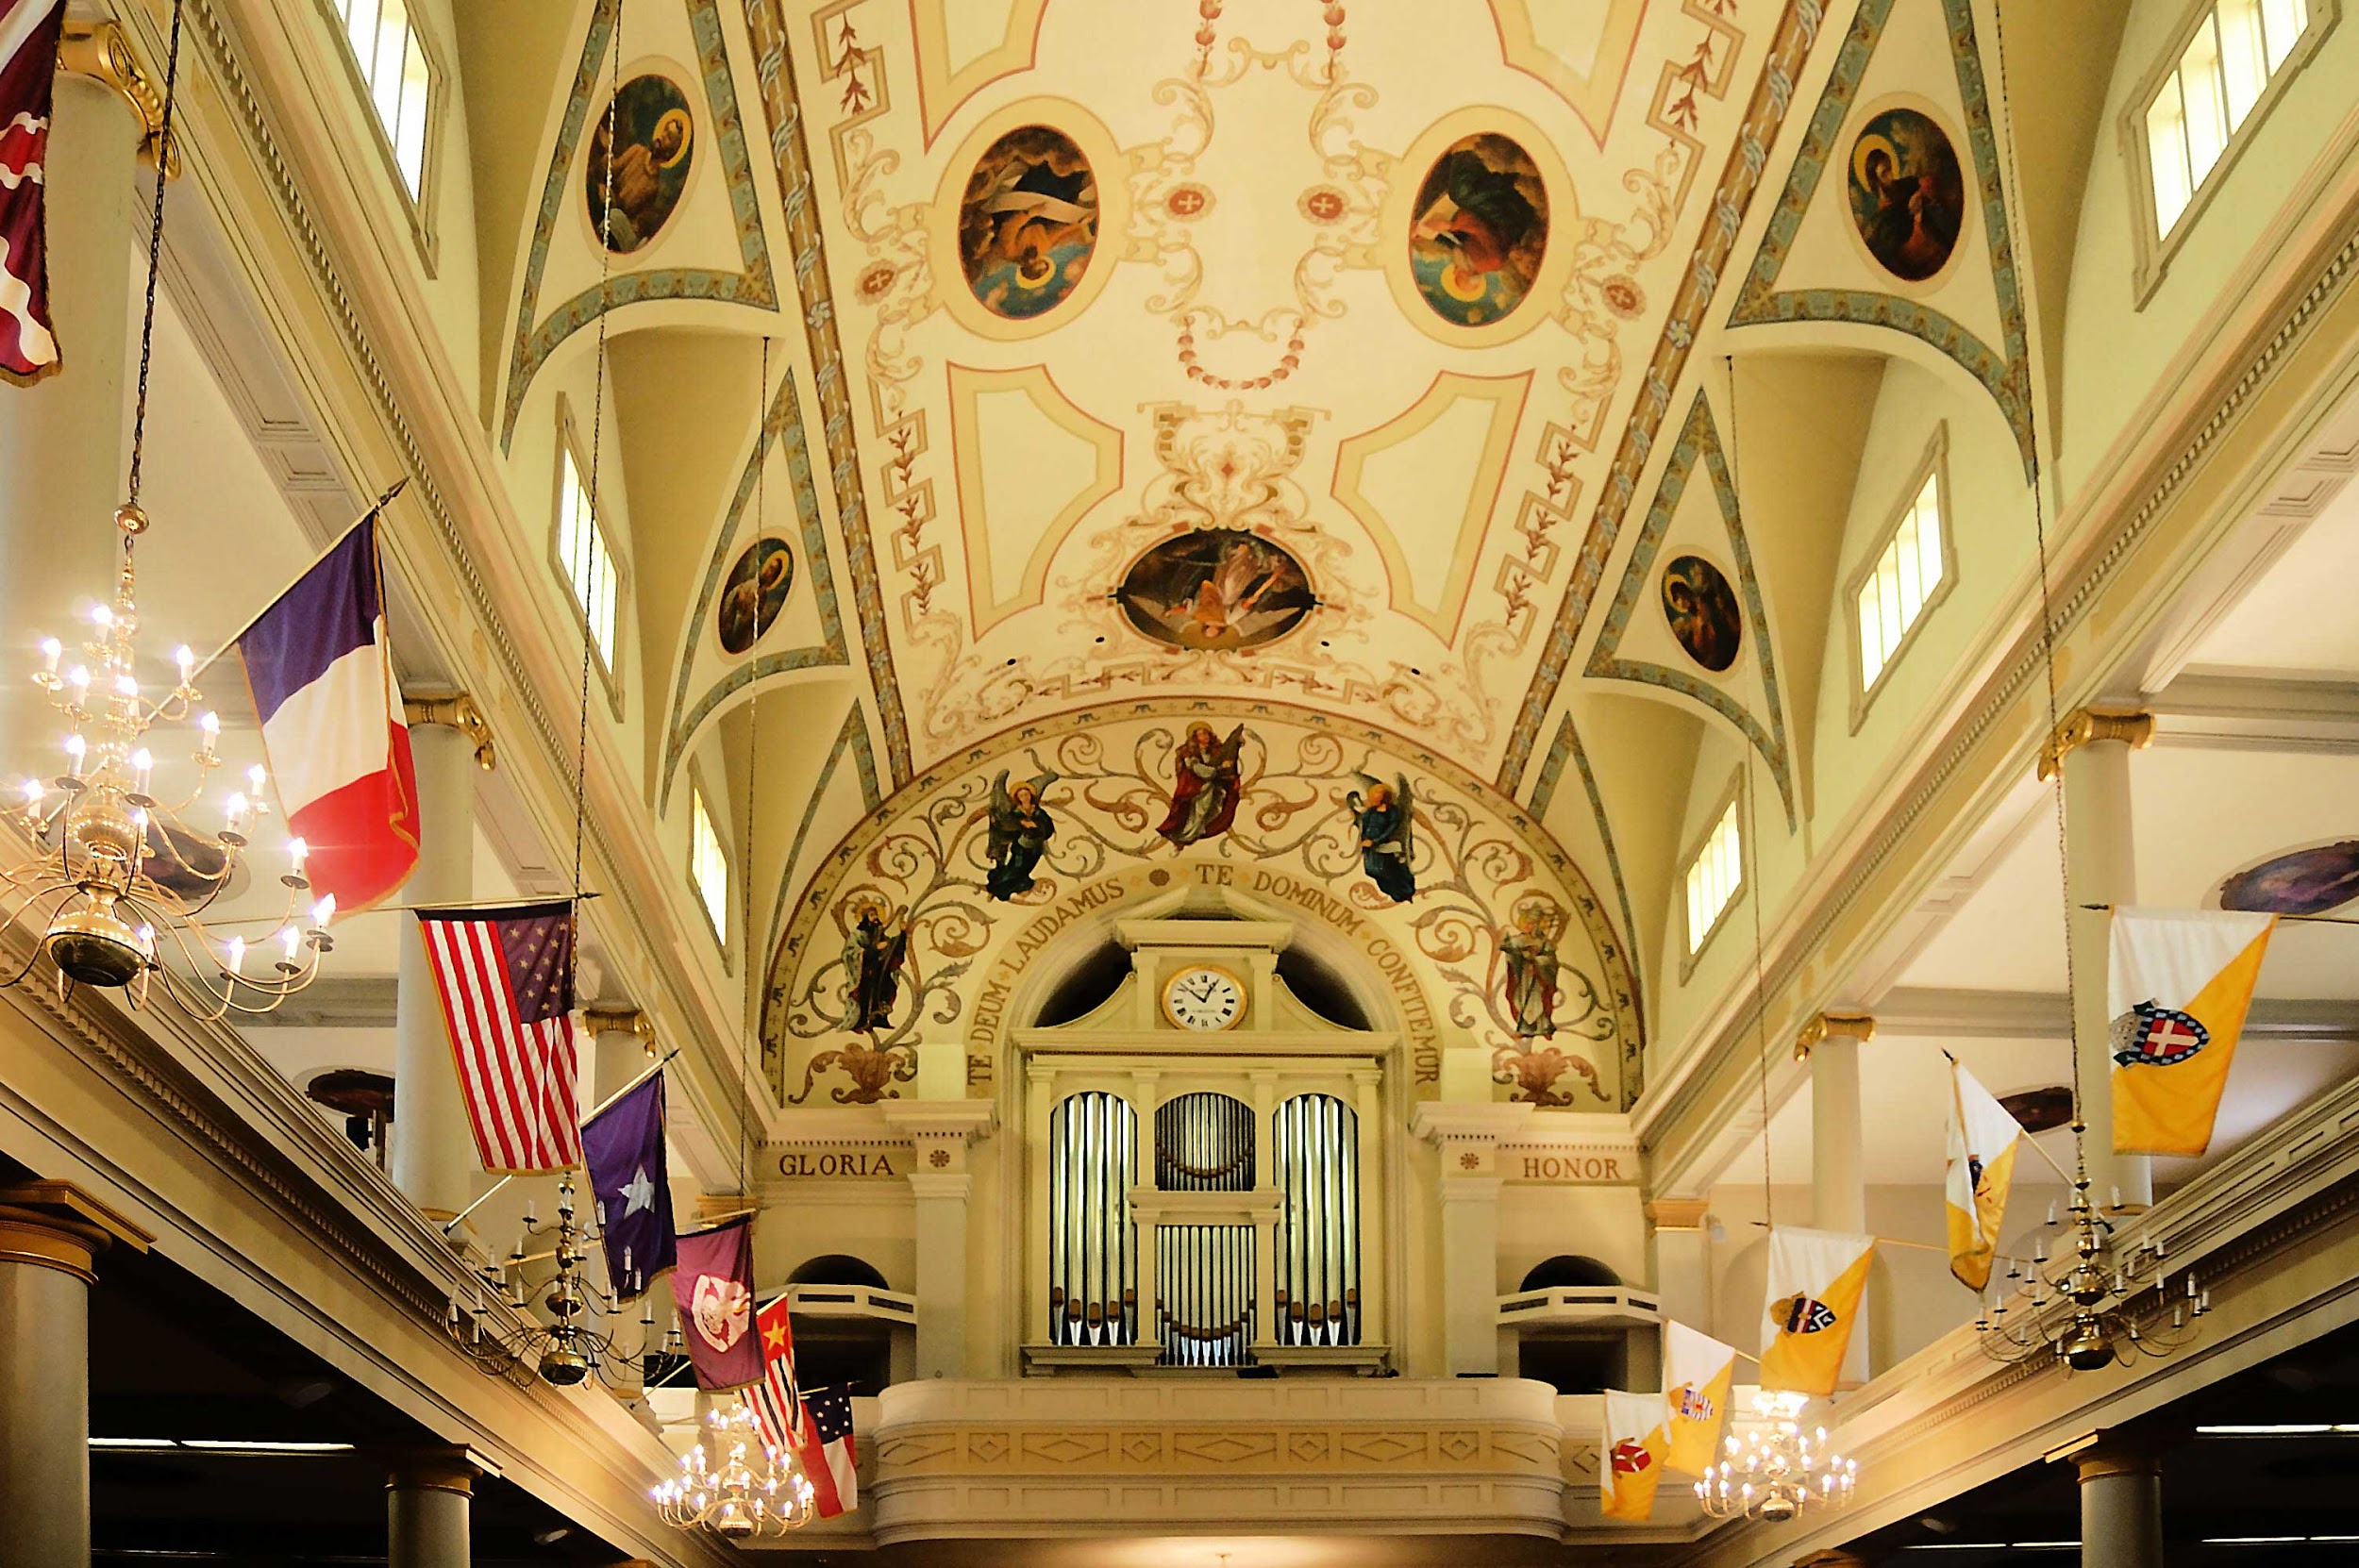 Visit The Beautiful St Louis Cathedral In New Orleans - Live One Good Life